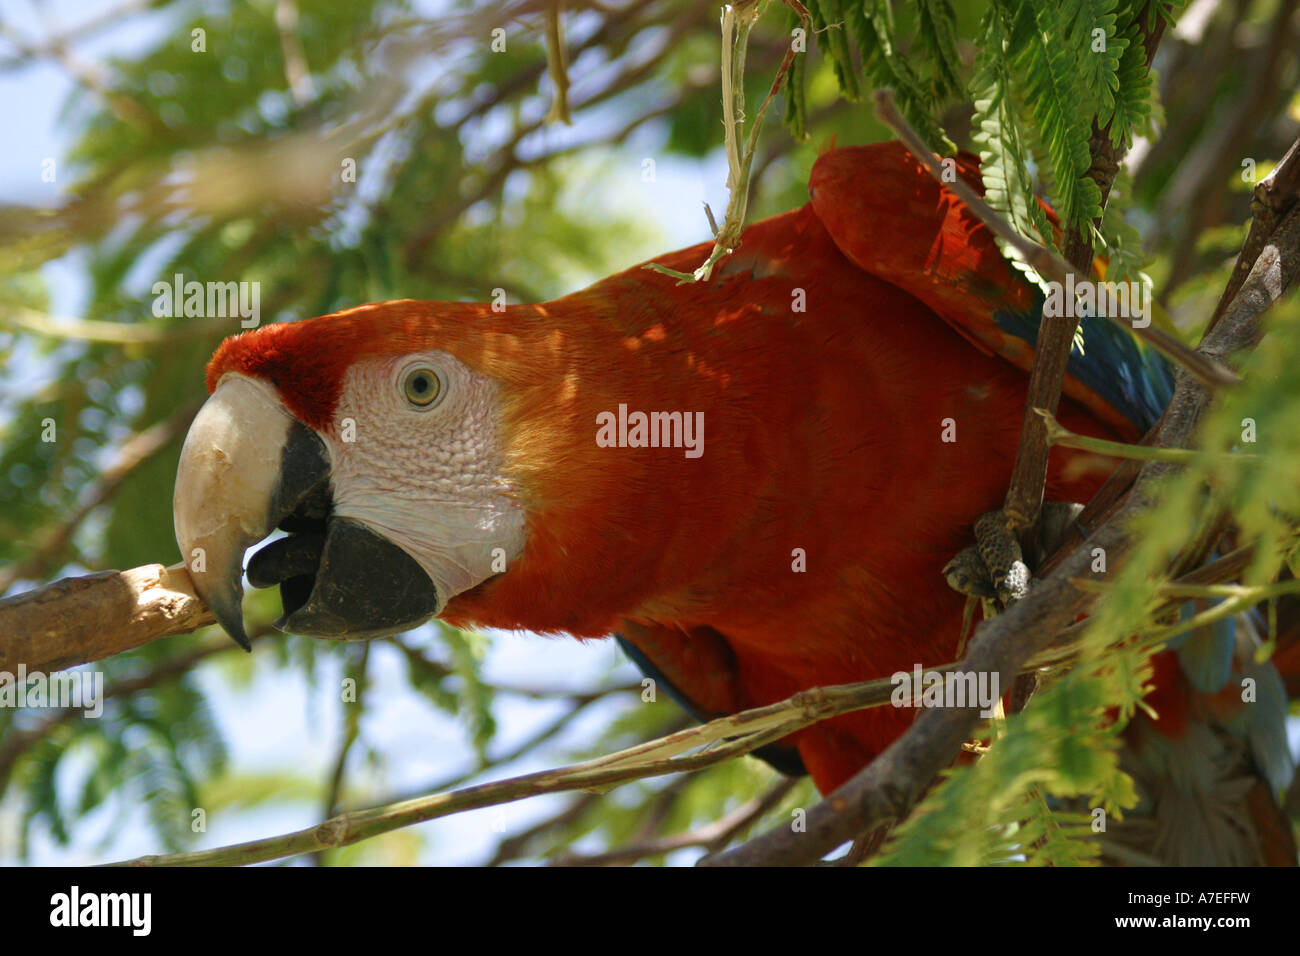 Parrot perched on a tree Stock Photo